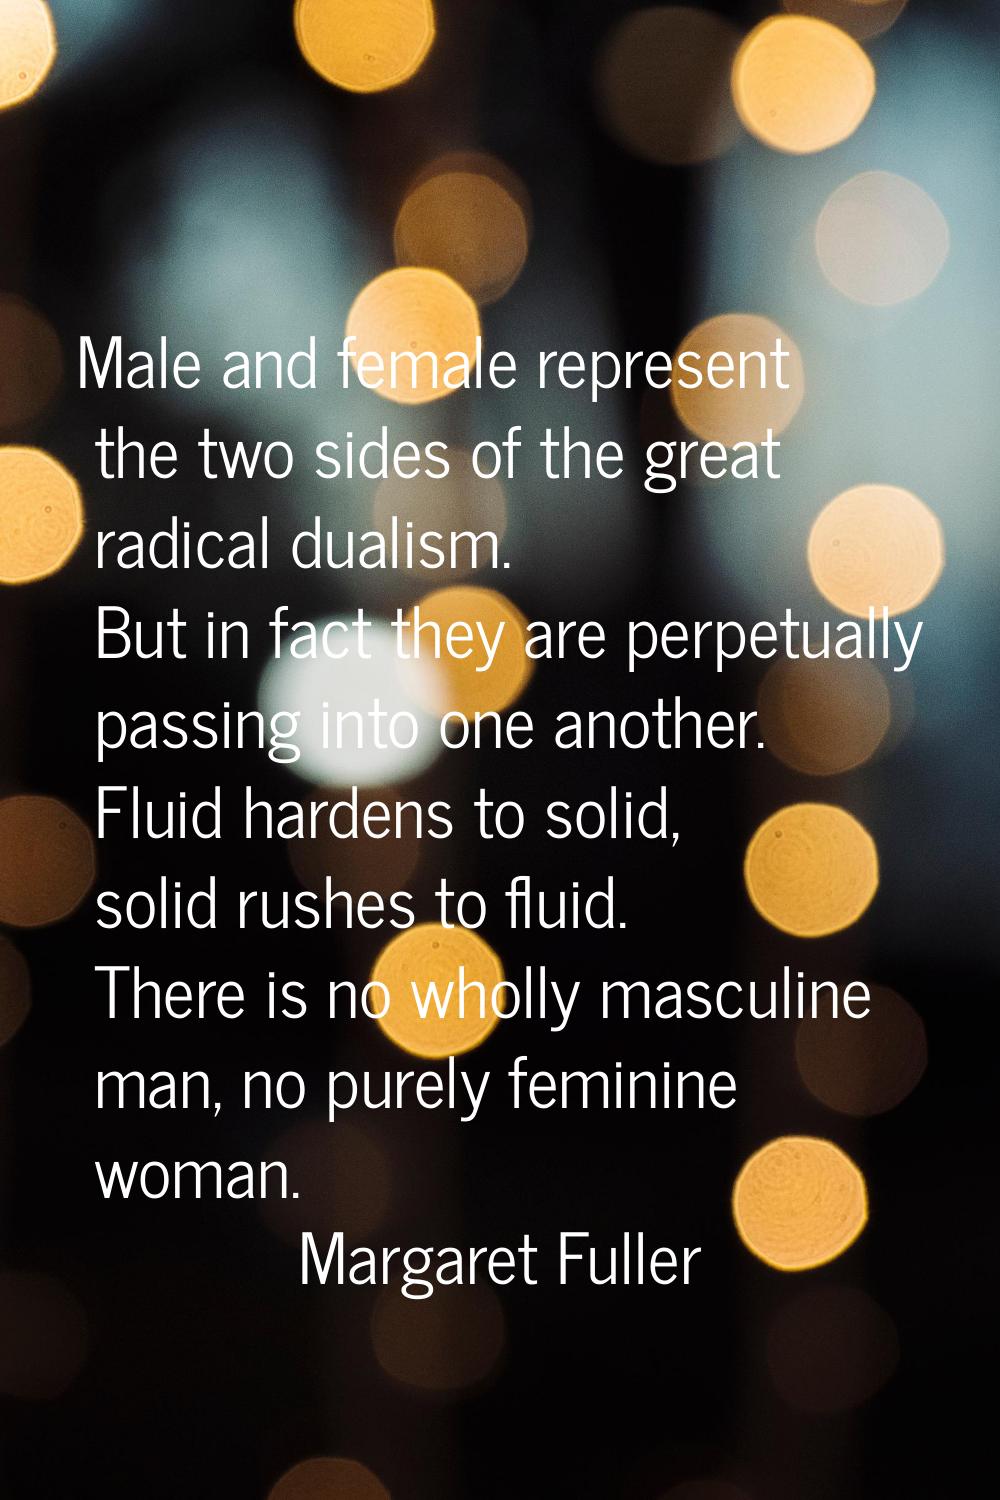 Male and female represent the two sides of the great radical dualism. But in fact they are perpetua